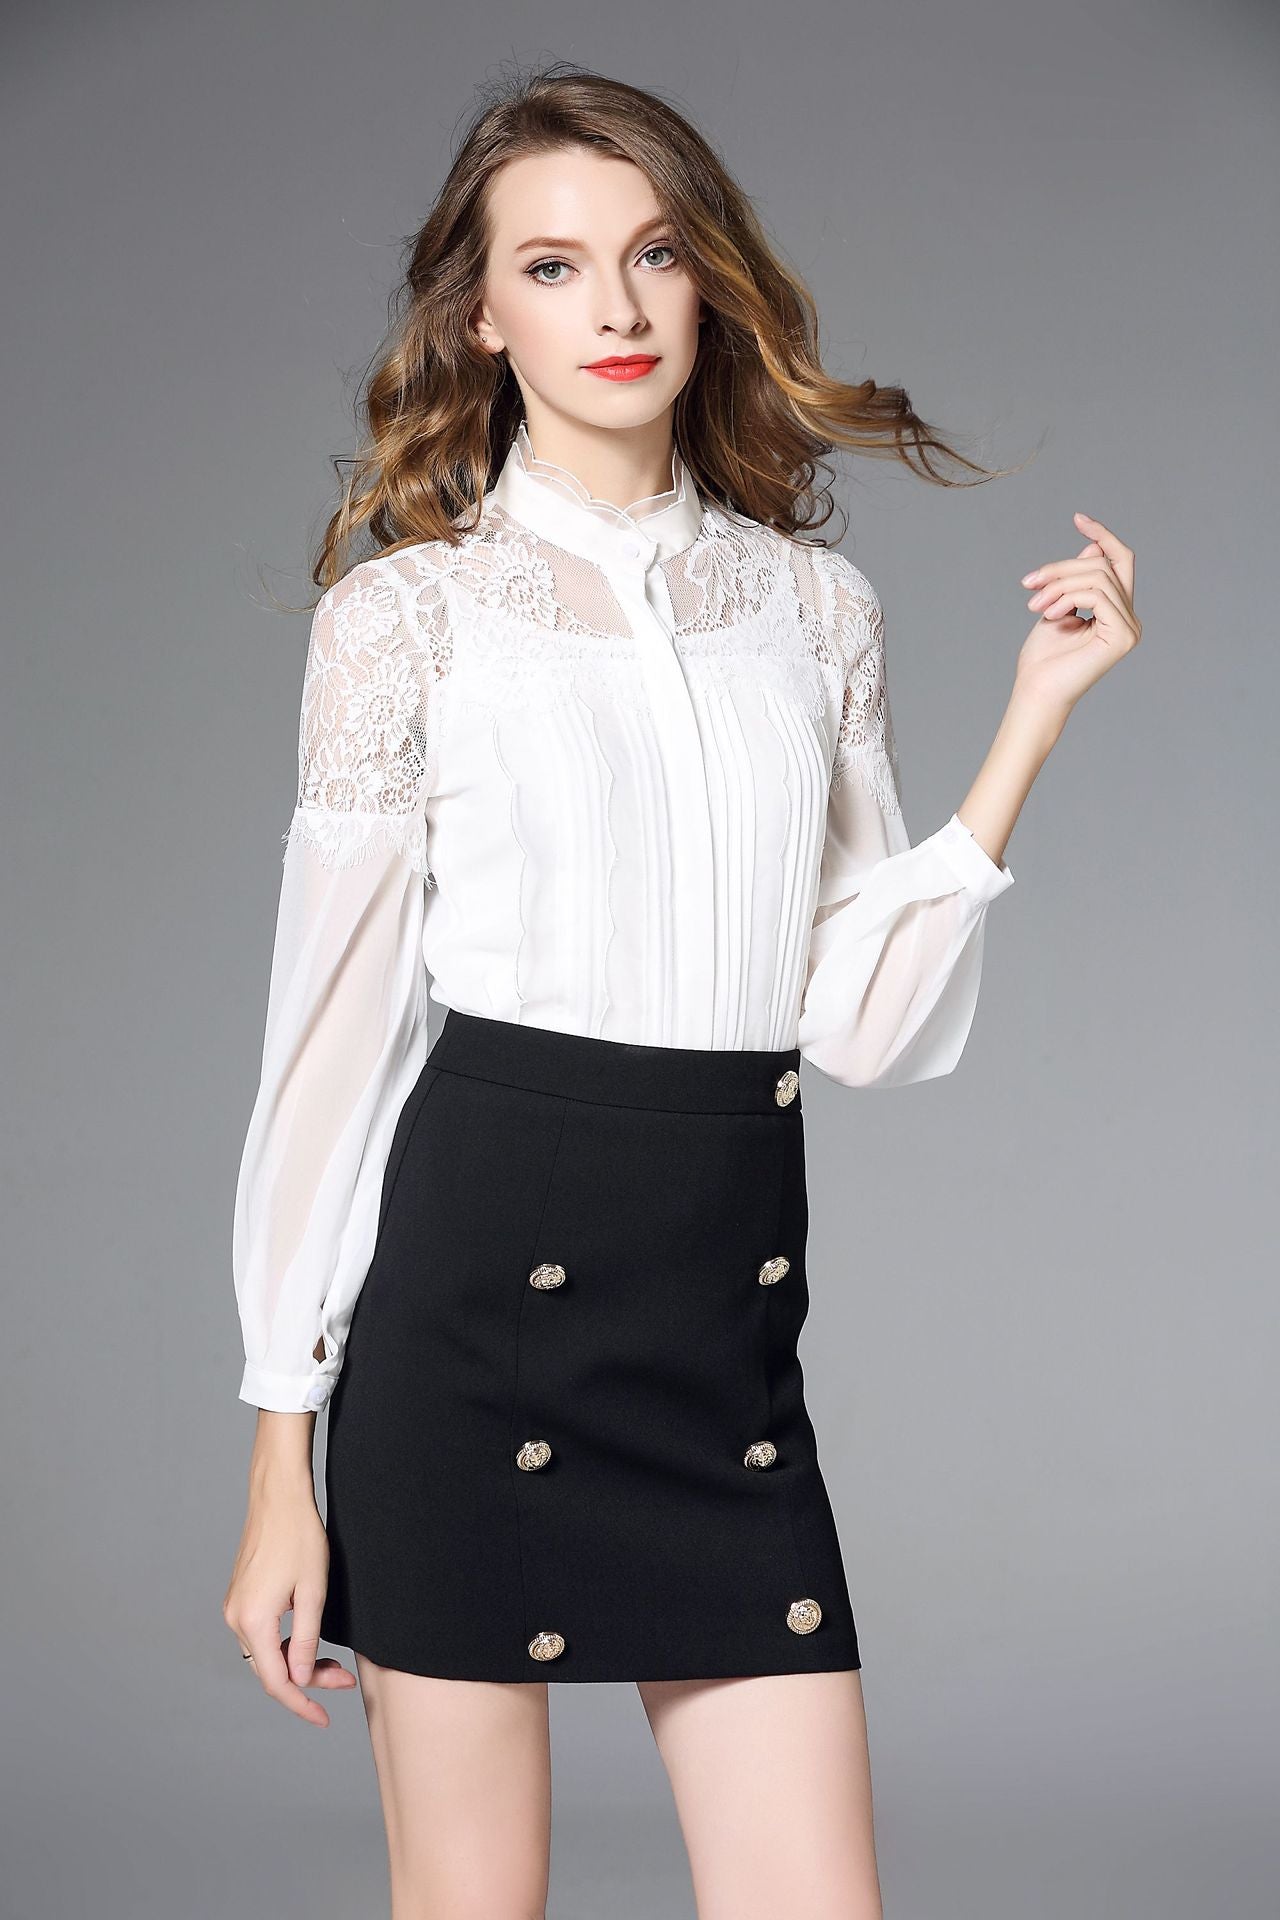 European And American Temperament Palace Style Shirt Stitching Lace One-piece Shirt